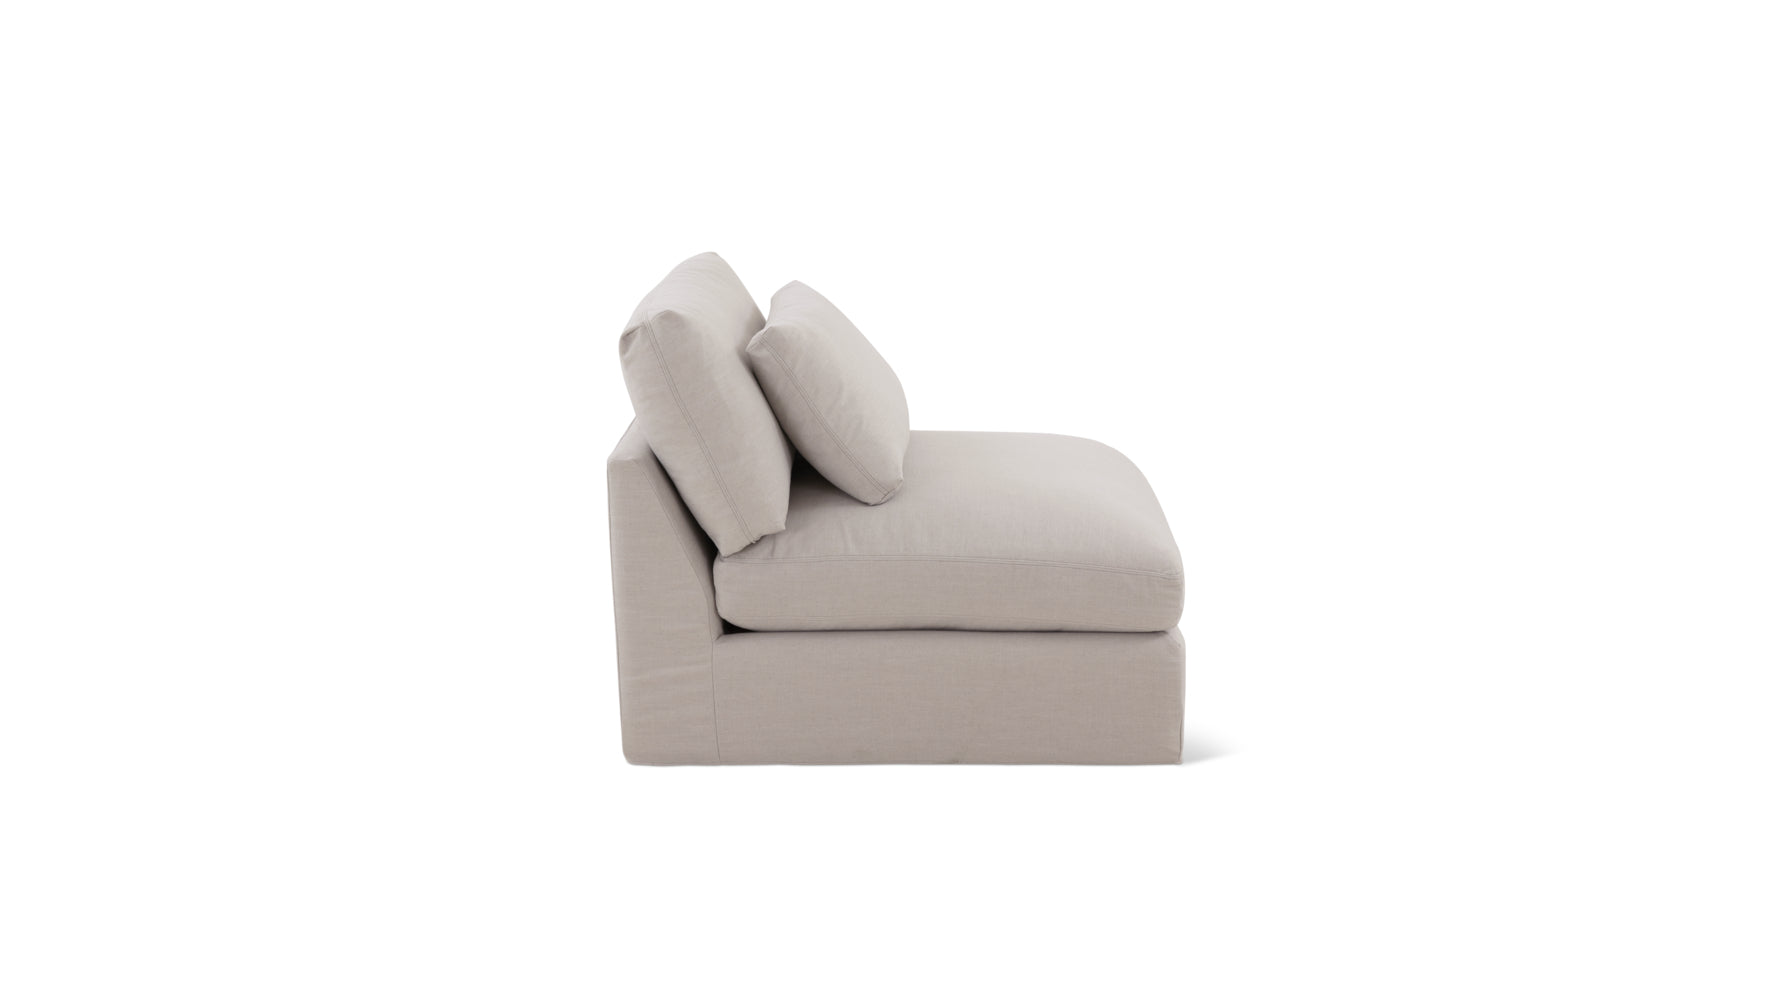 Get Together™ Armless Chair, Large, Clay - Image 6